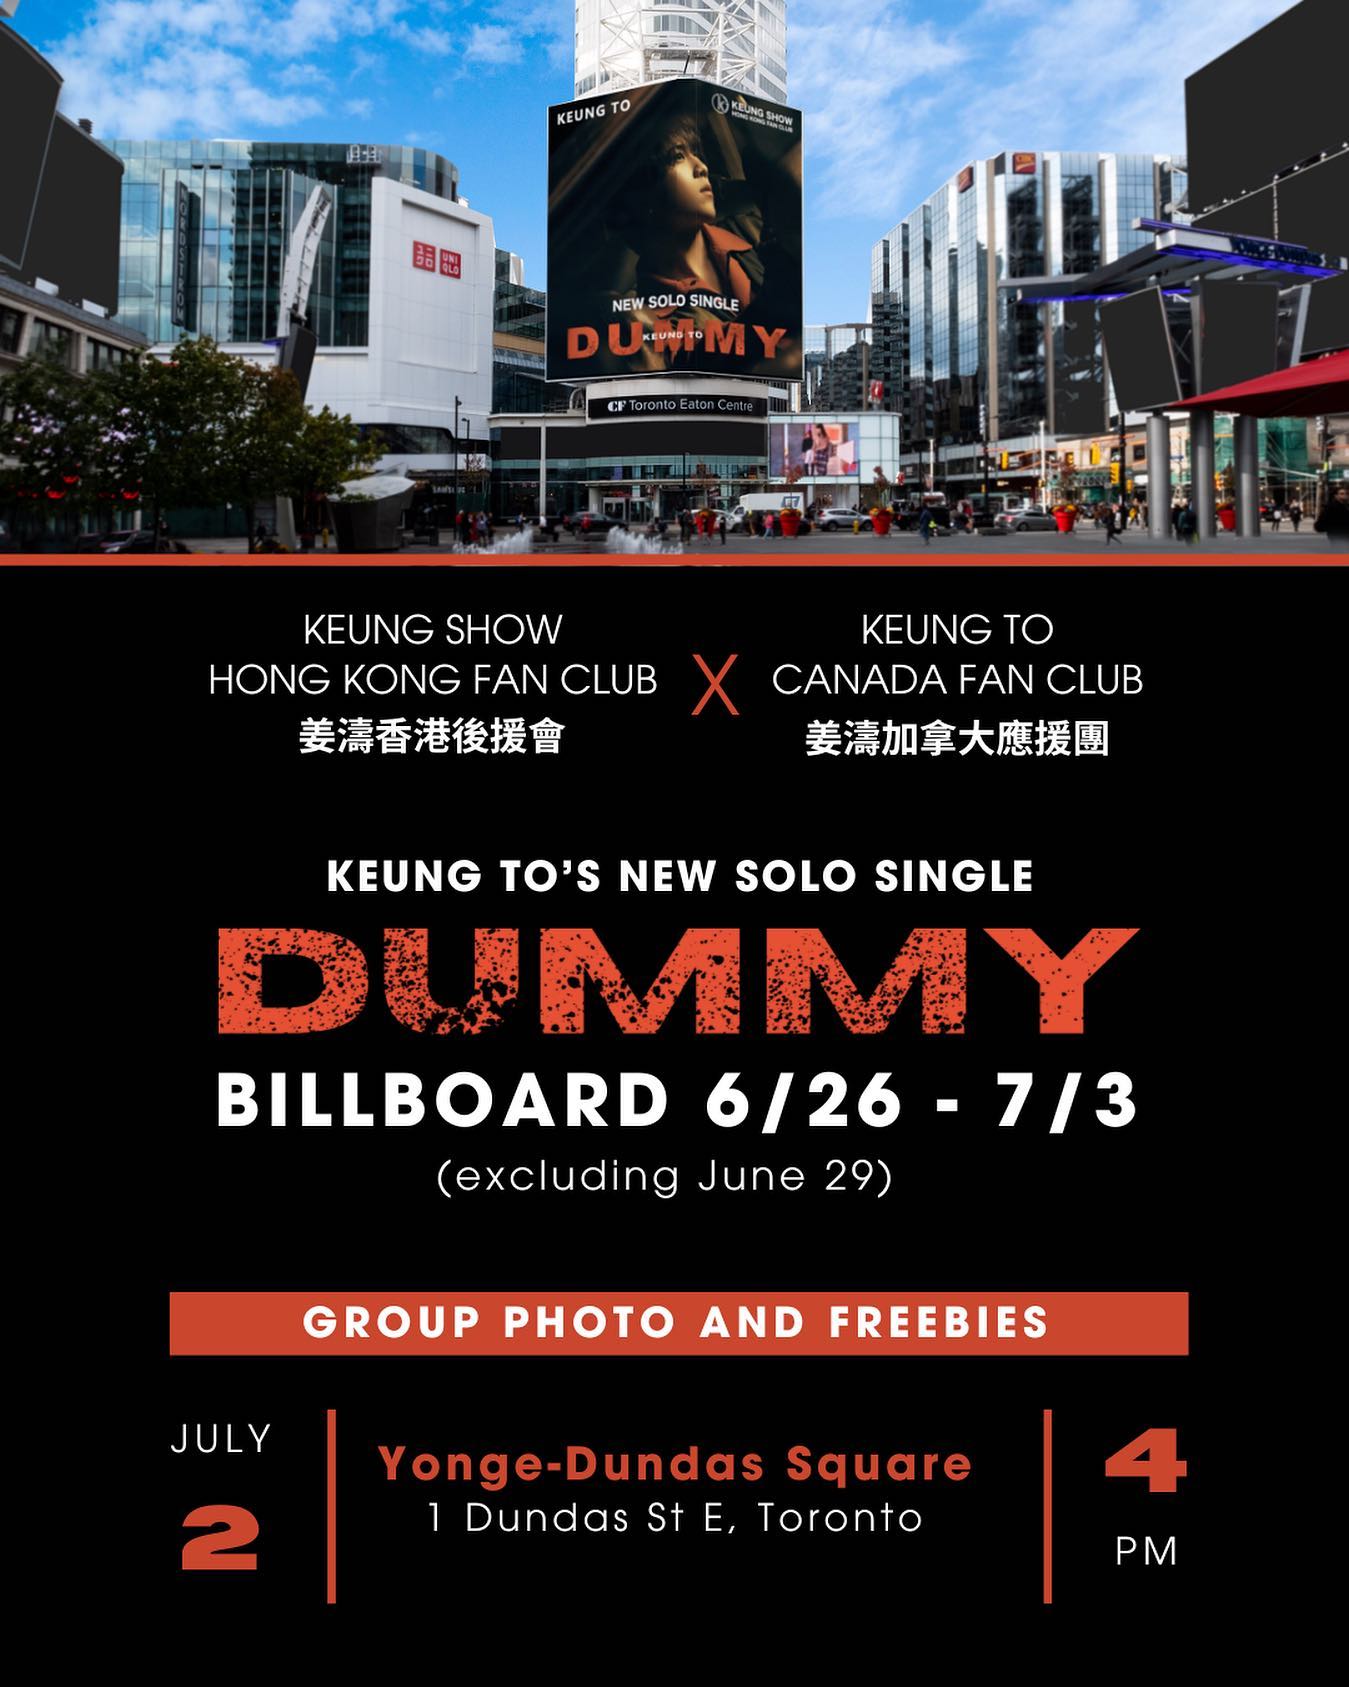 Keung To’s new song “Dummy” advertisement on Eaton Centre billboard  Canada fan club will gather in Yonge-Dundas Square